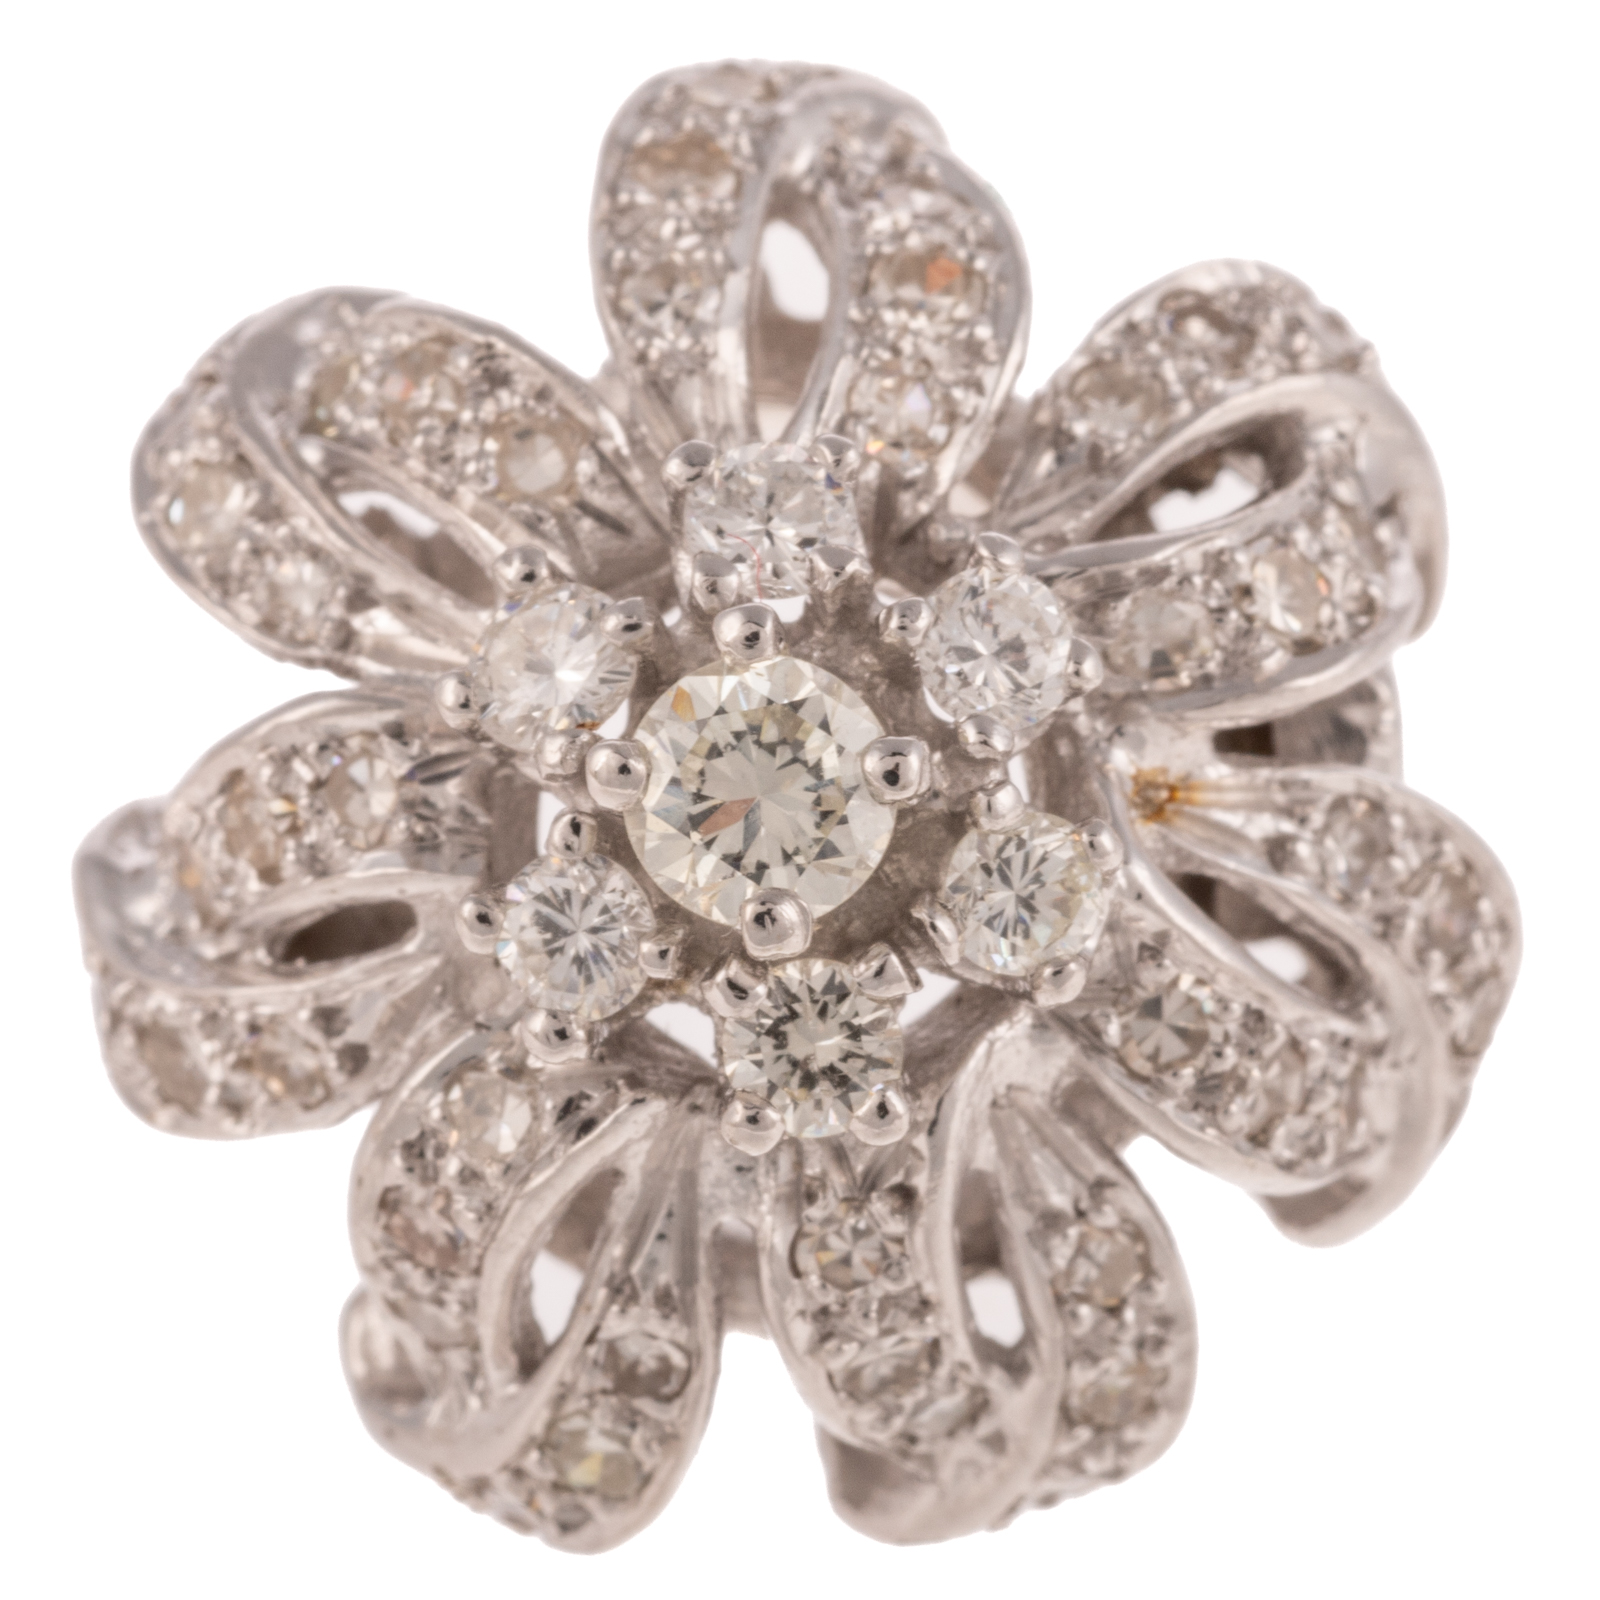 A DIAMOND FLOWER COCKTAIL RING 2ea71a